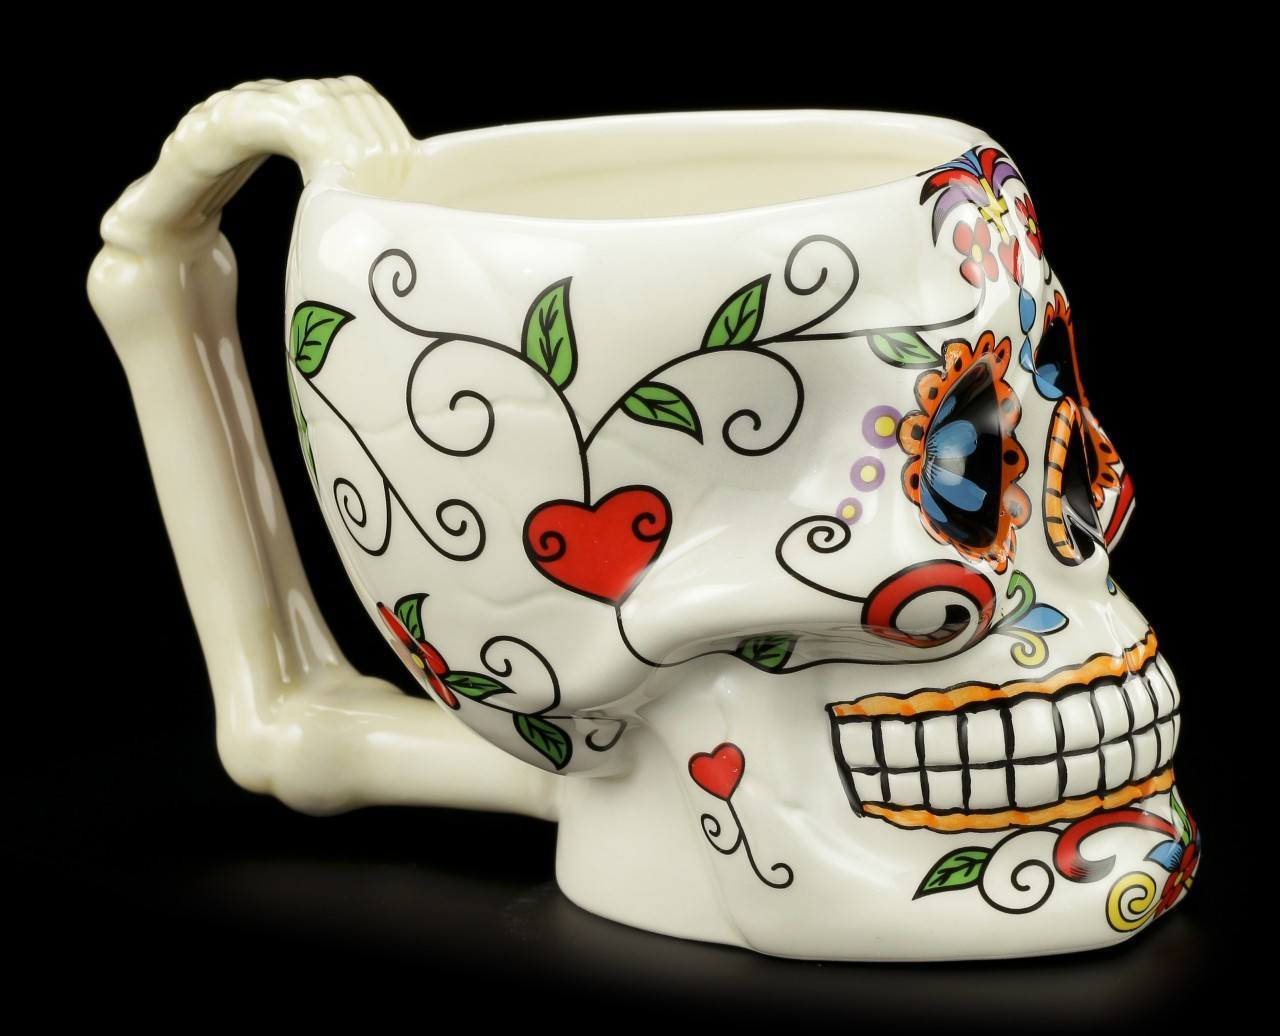 Skull Mug with Flowers - Day of the Dead